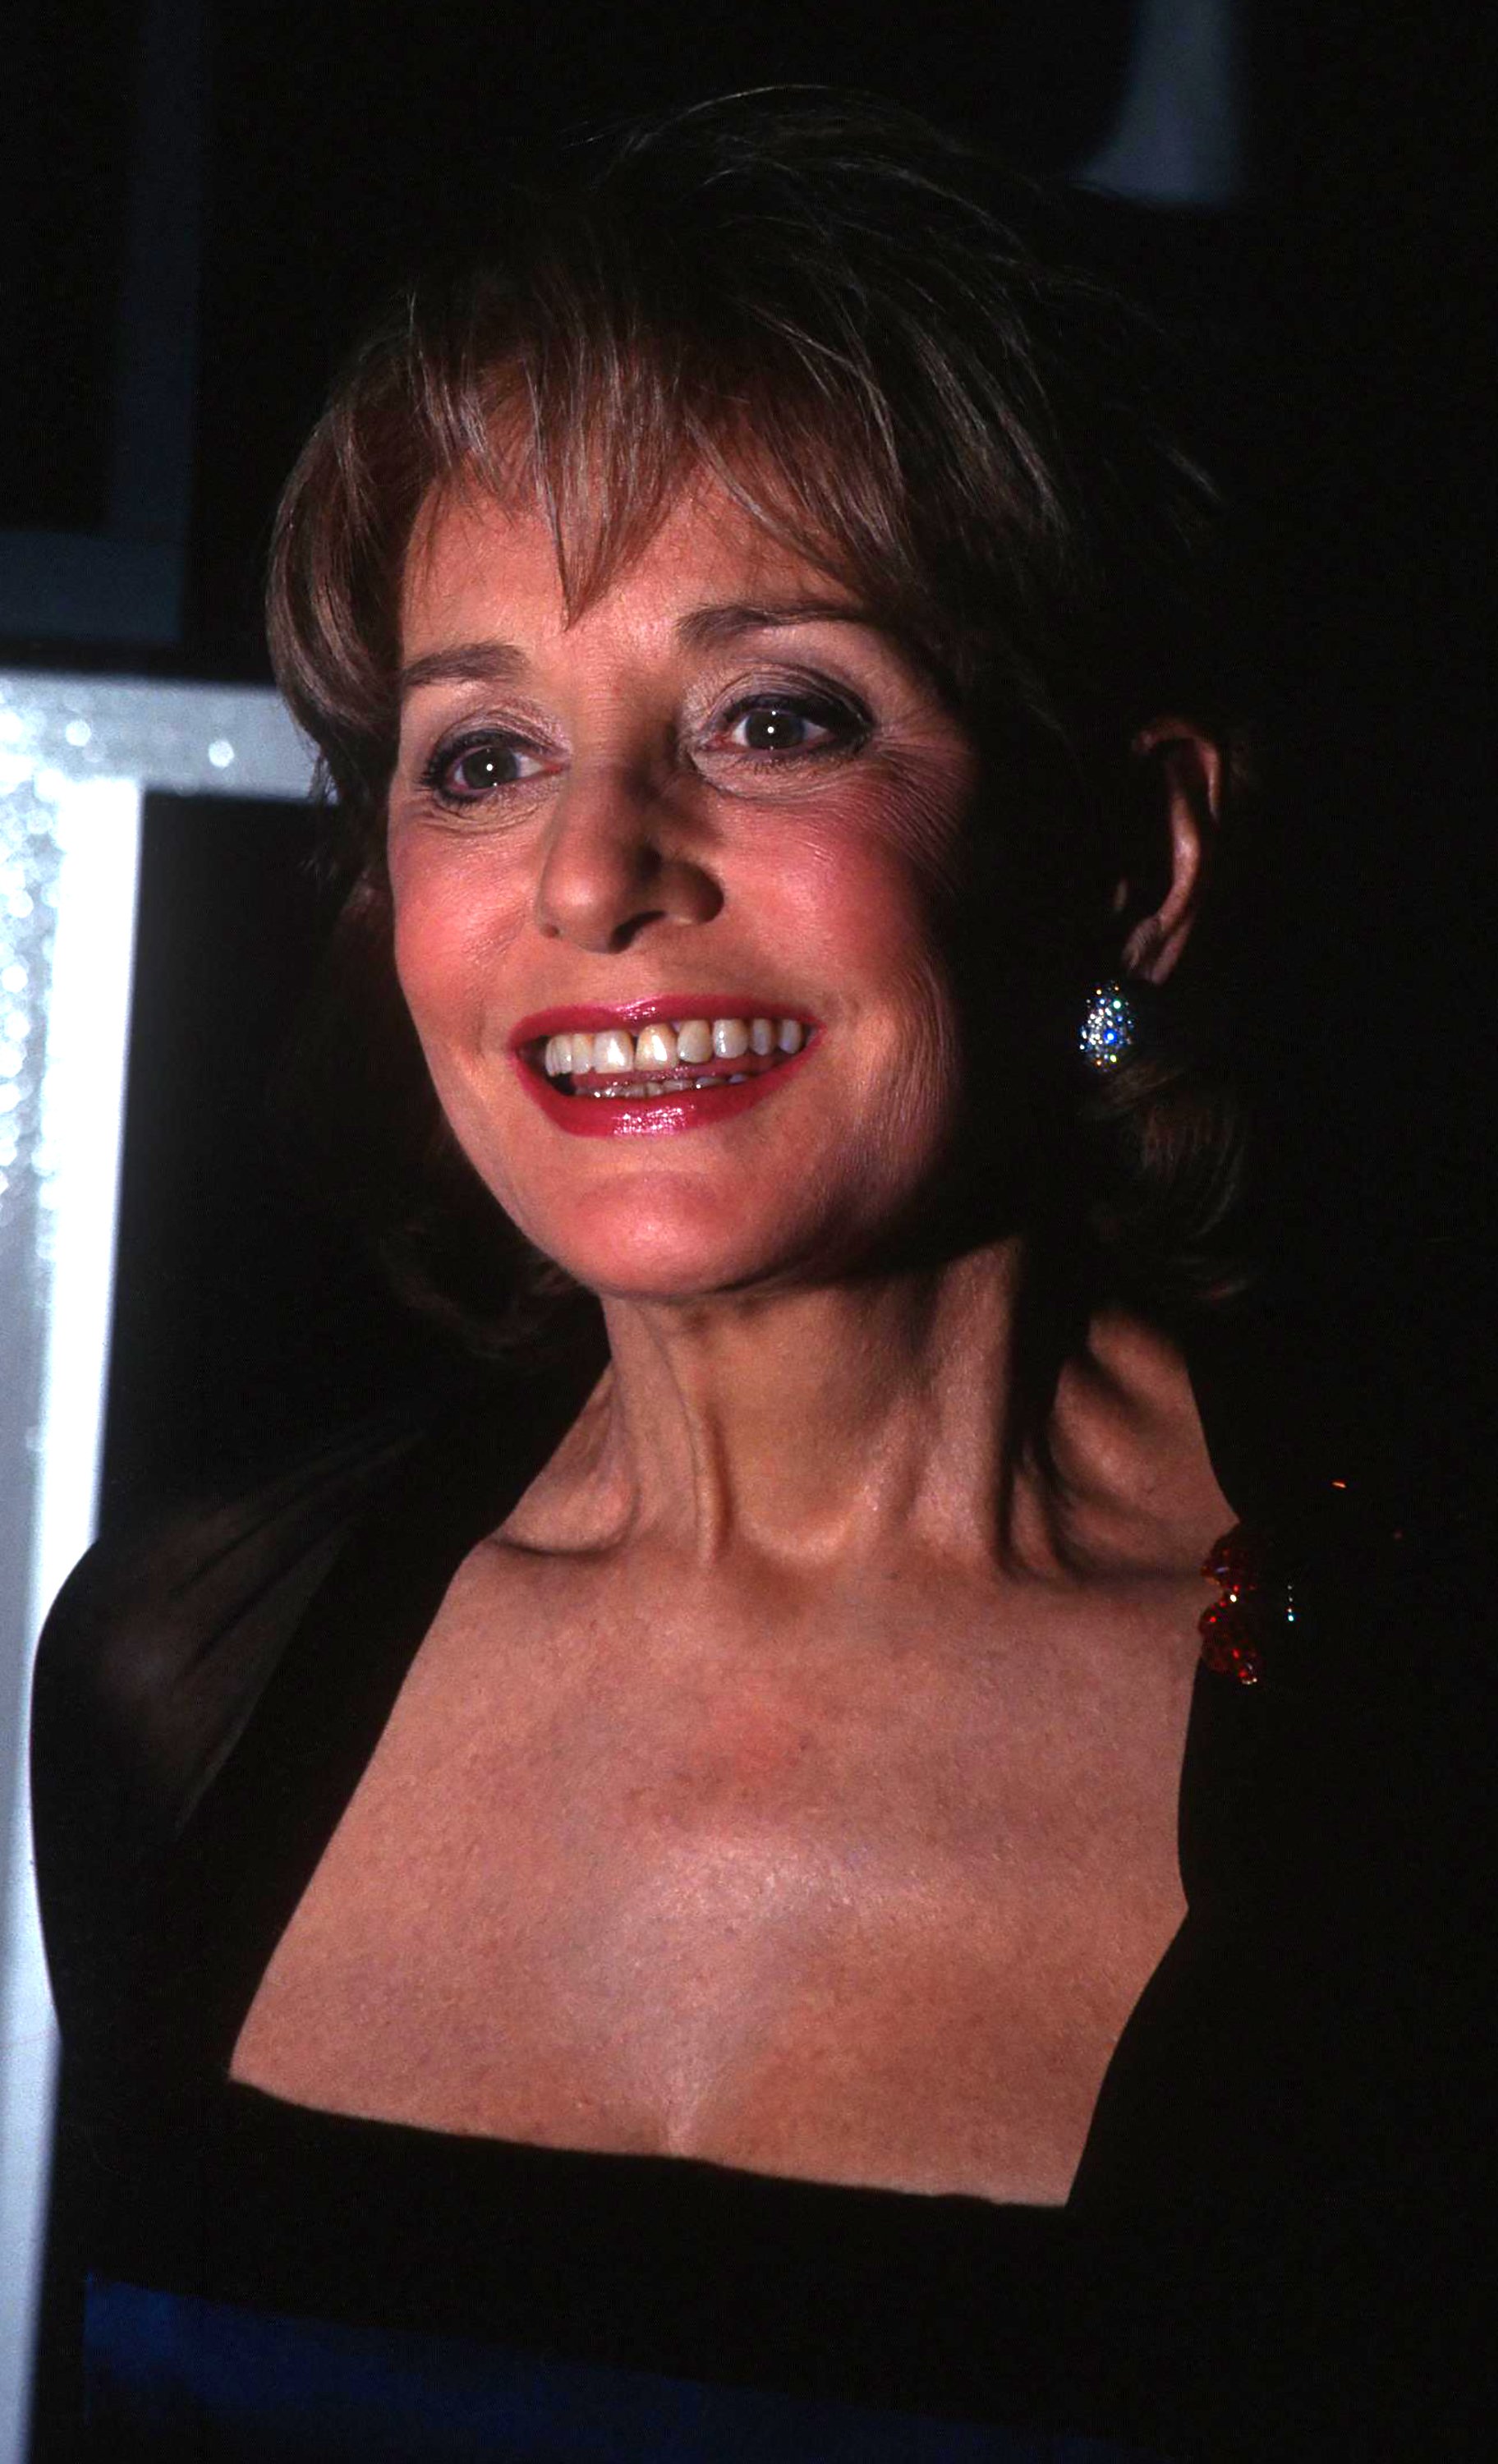 Barbara Walters attends the Museum of Television and Radio Gala Honoring Alan Alda and Barbara Walters at the Waldorf Astoria Hotel on February 8, 1996 in New York City. ┃Source: Getty Images